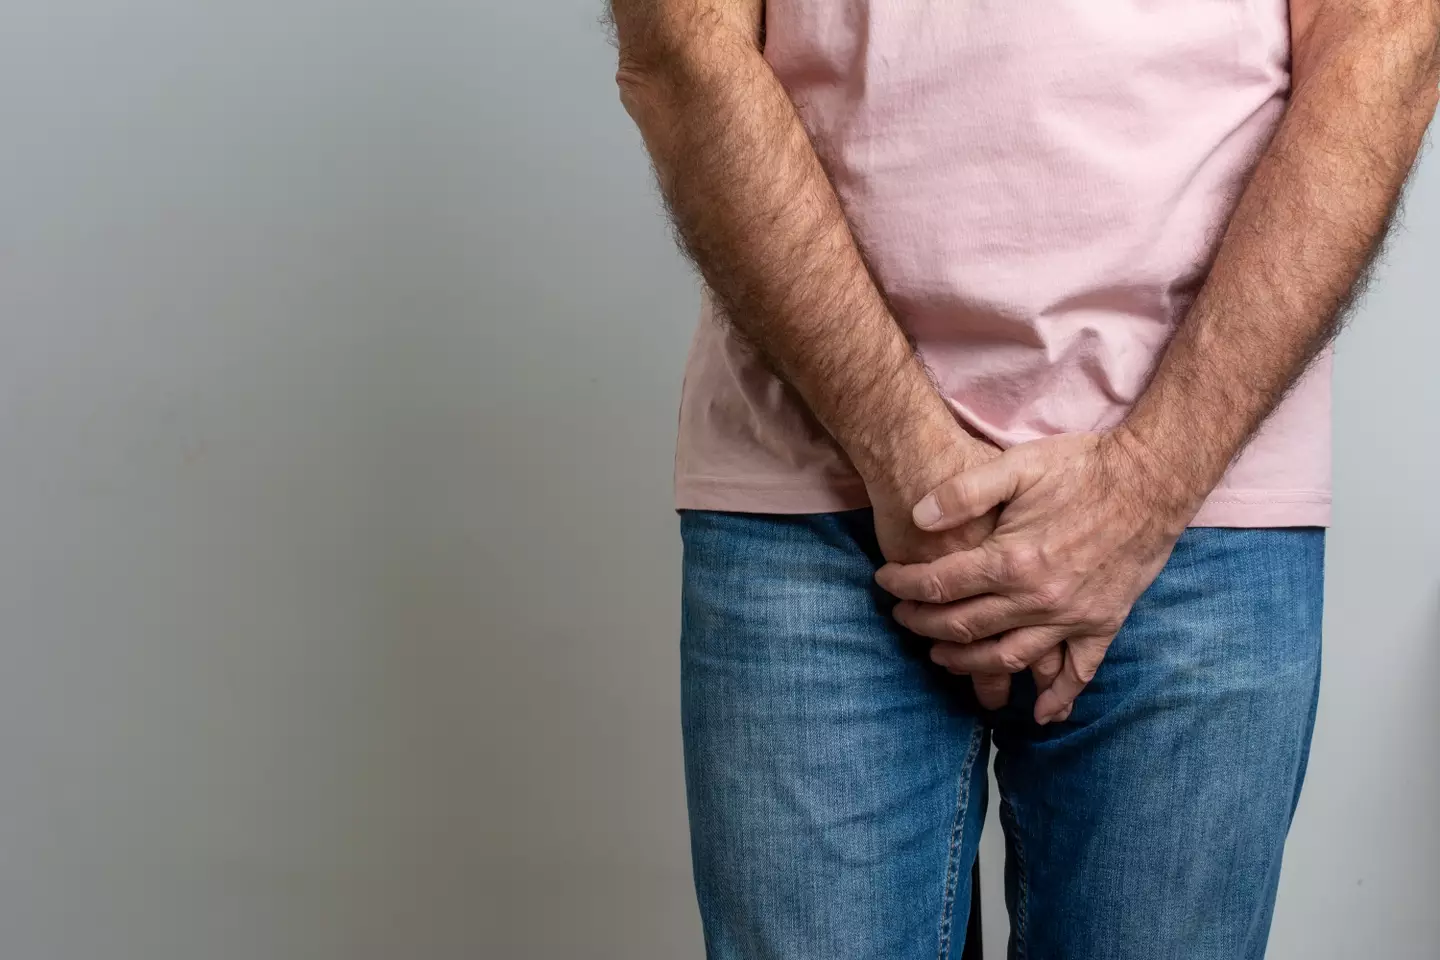 'Blue balls' can leave blokes writhing in pain.